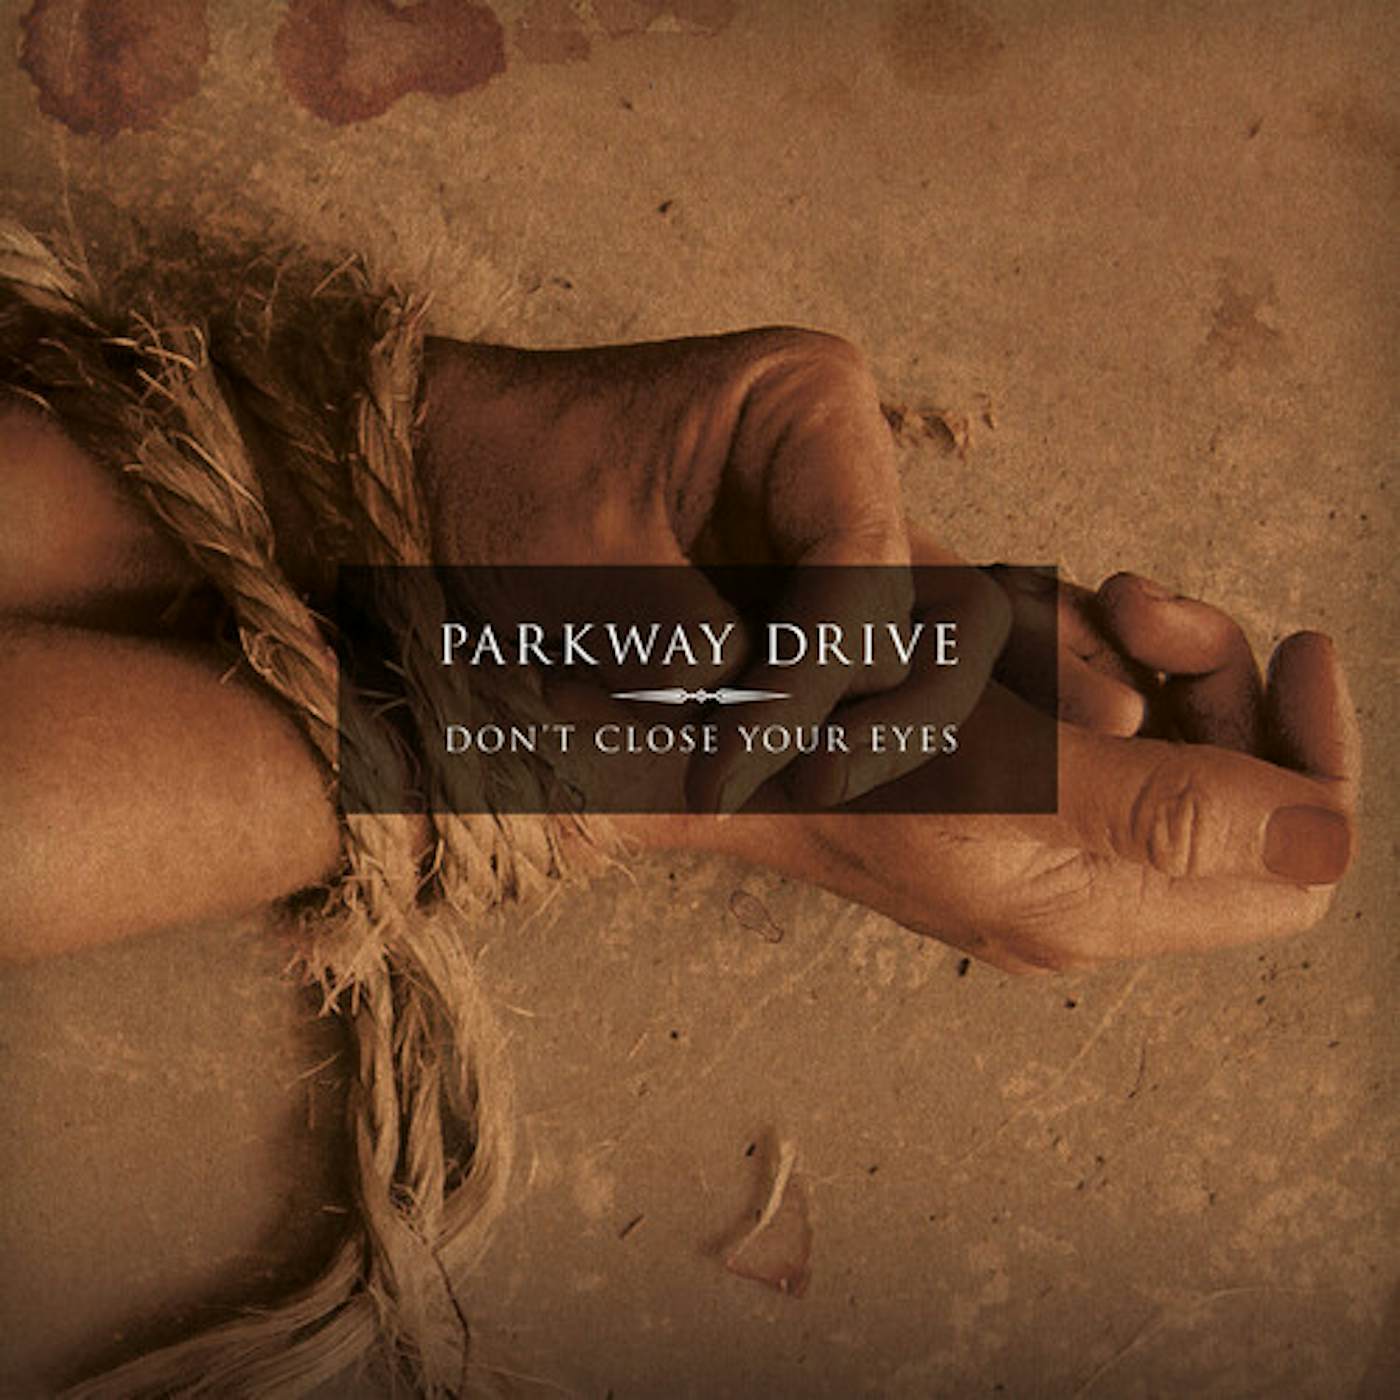 Parkway Drive Don't Close Your Eyes - Eco Mix Vinyl Record